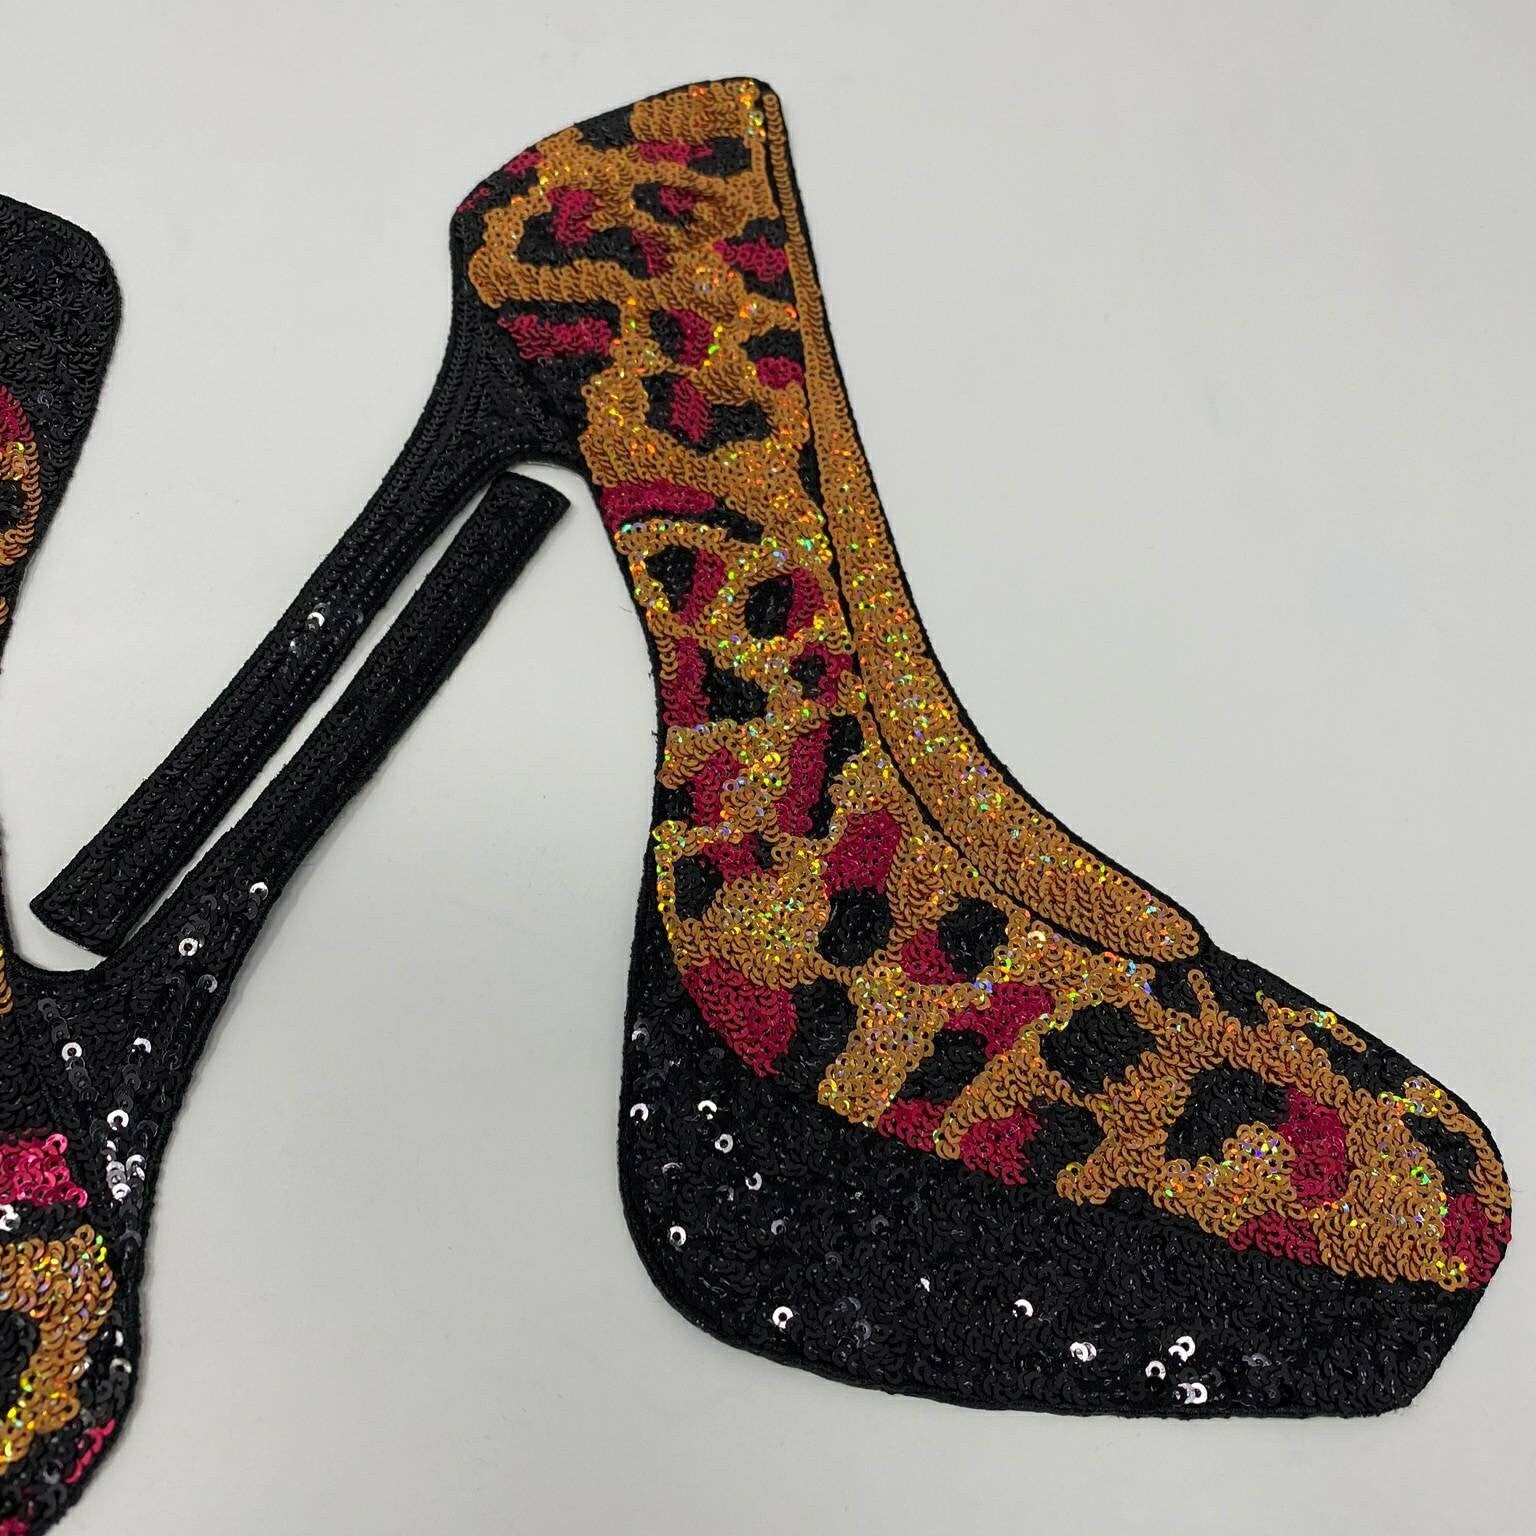 Sexy, Leopard Print Sequins "High Heel" Iron-on Patch, Colorful, Cool Bling Patch, DIY Applique; Vintage, Size 12",Large Jacket Patch